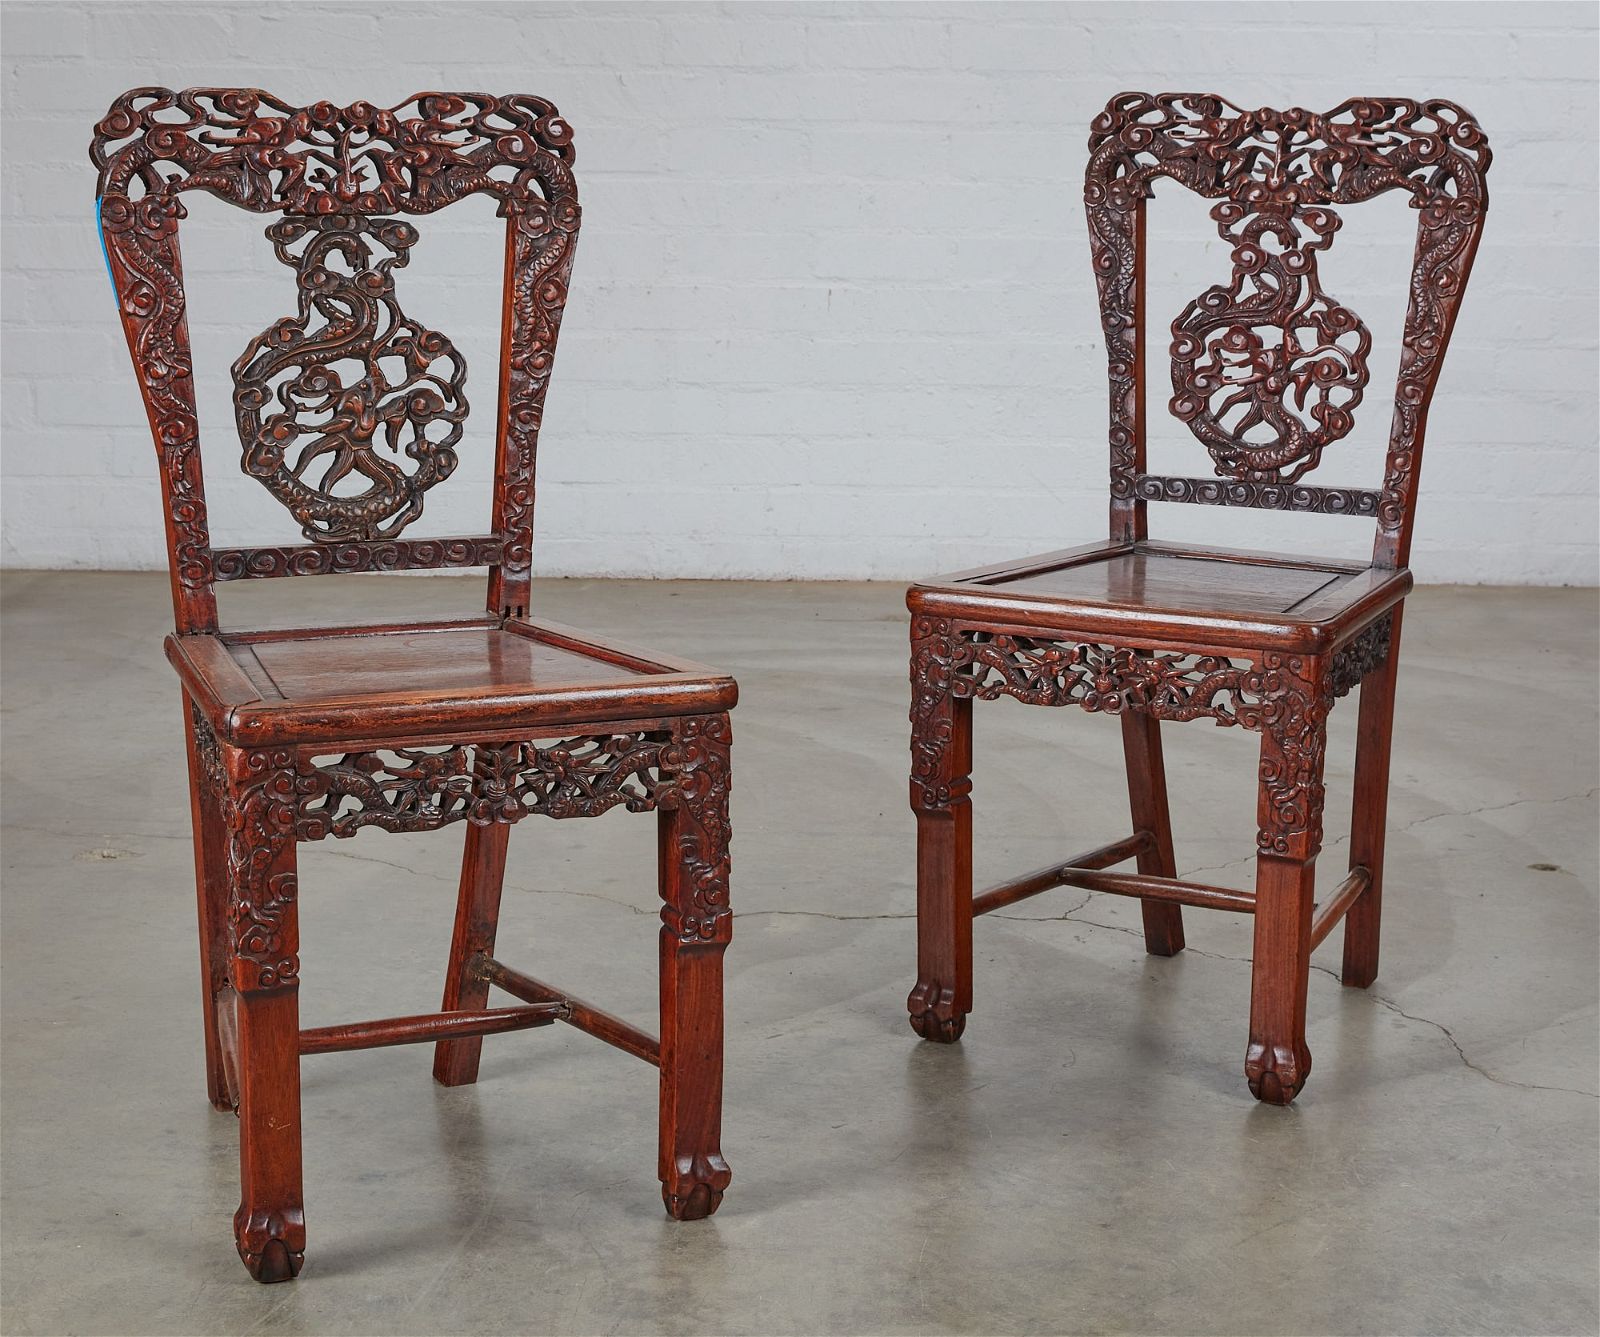 A PAIR OF ASIAN CARVED HARDWOOD